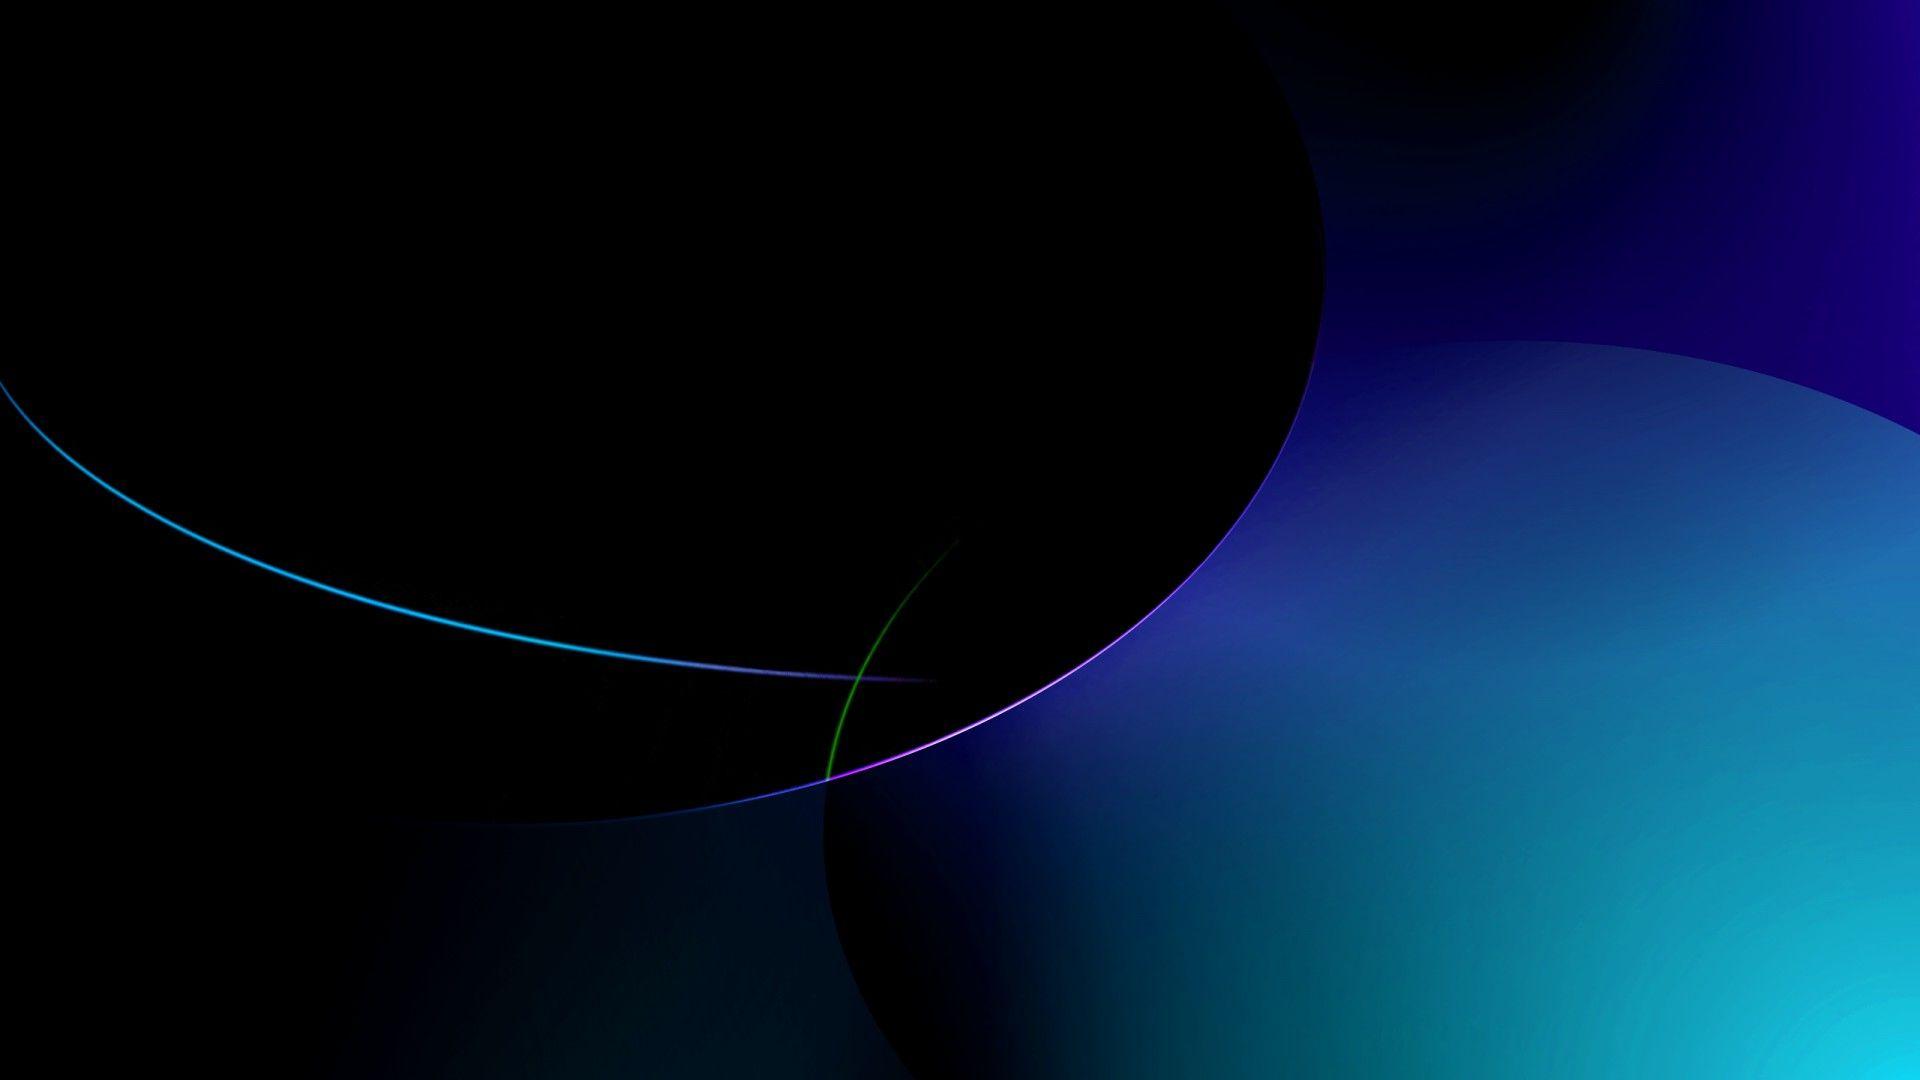 Image For > Blue And Black Abstract Wallpapers